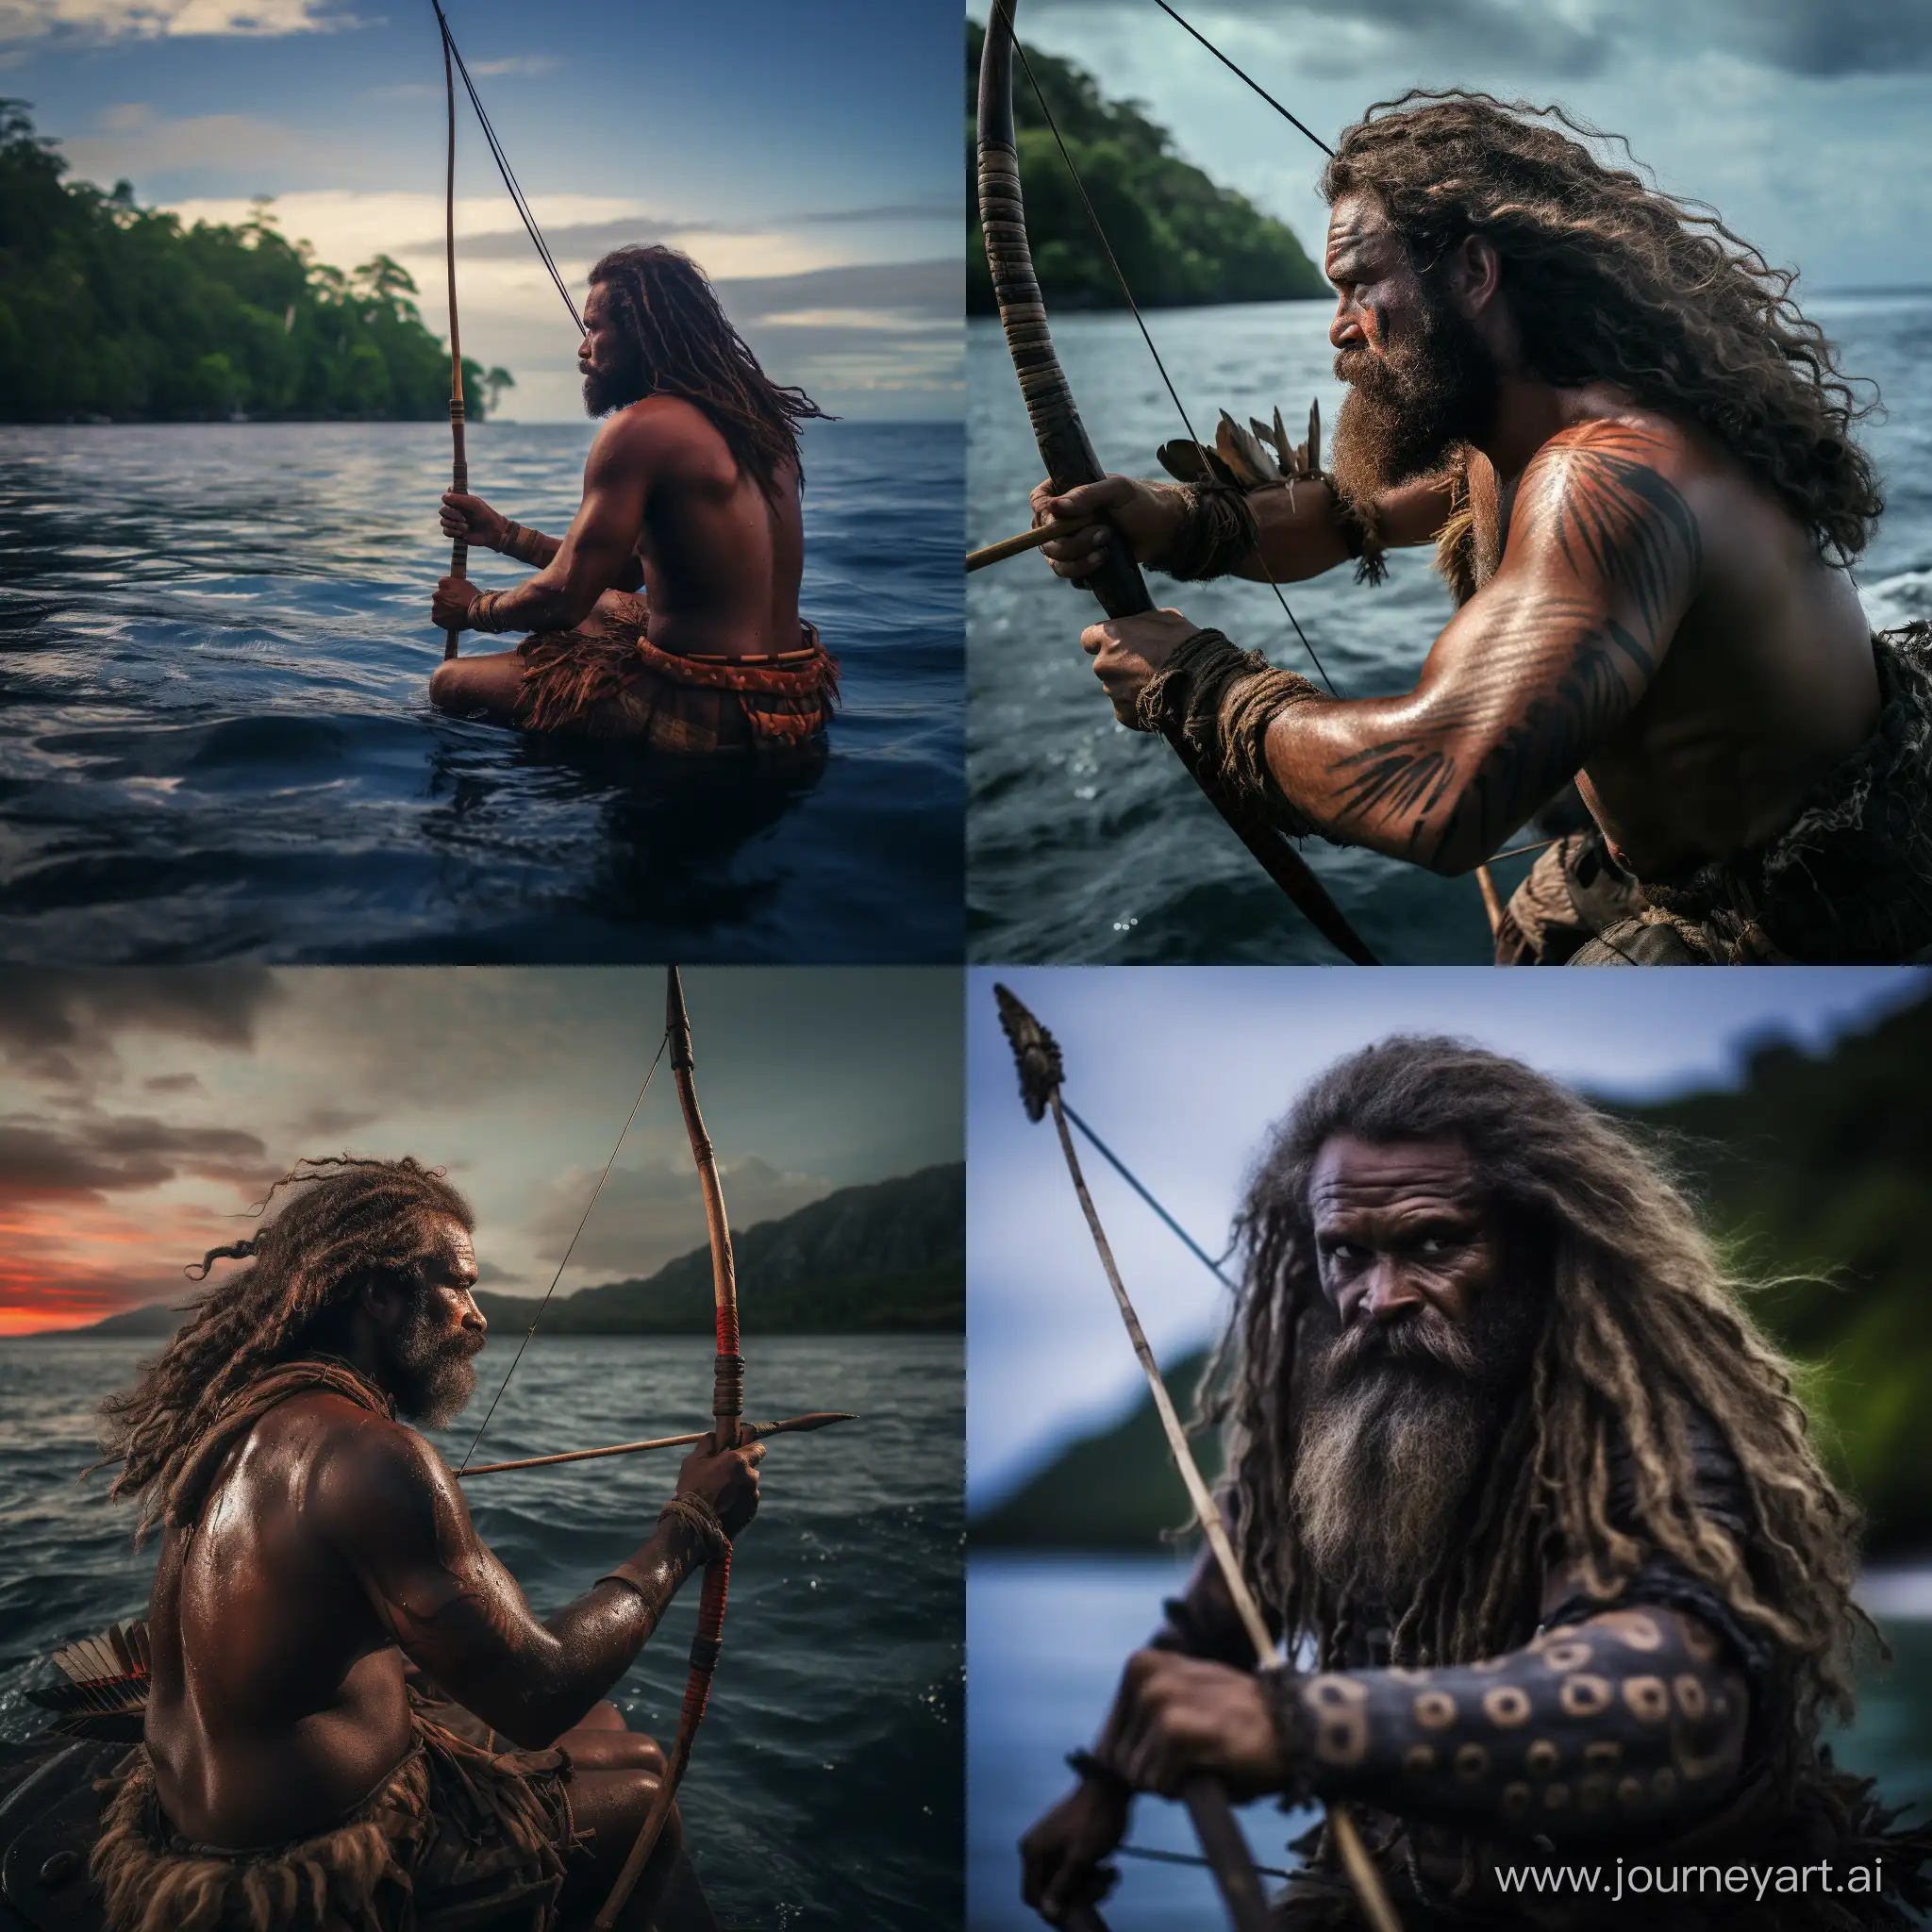 Vanuatu-Fisherman-Hunting-with-Bow-and-Arrow-in-Cinematic-Seascape